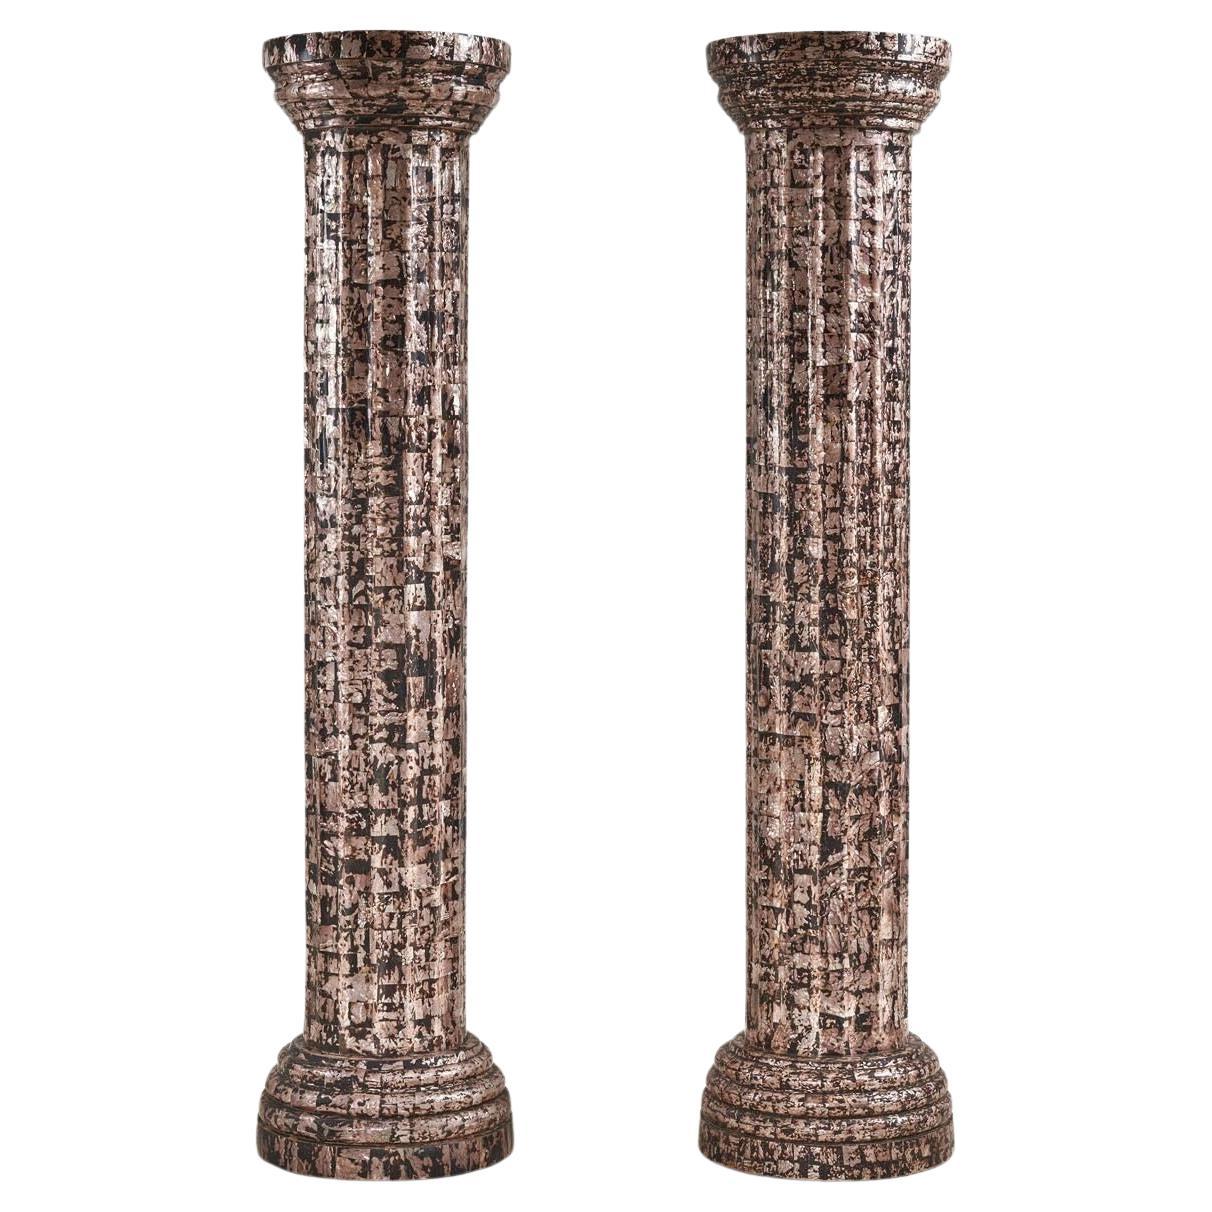 Mother-of-Pearl Pedestals and Columns